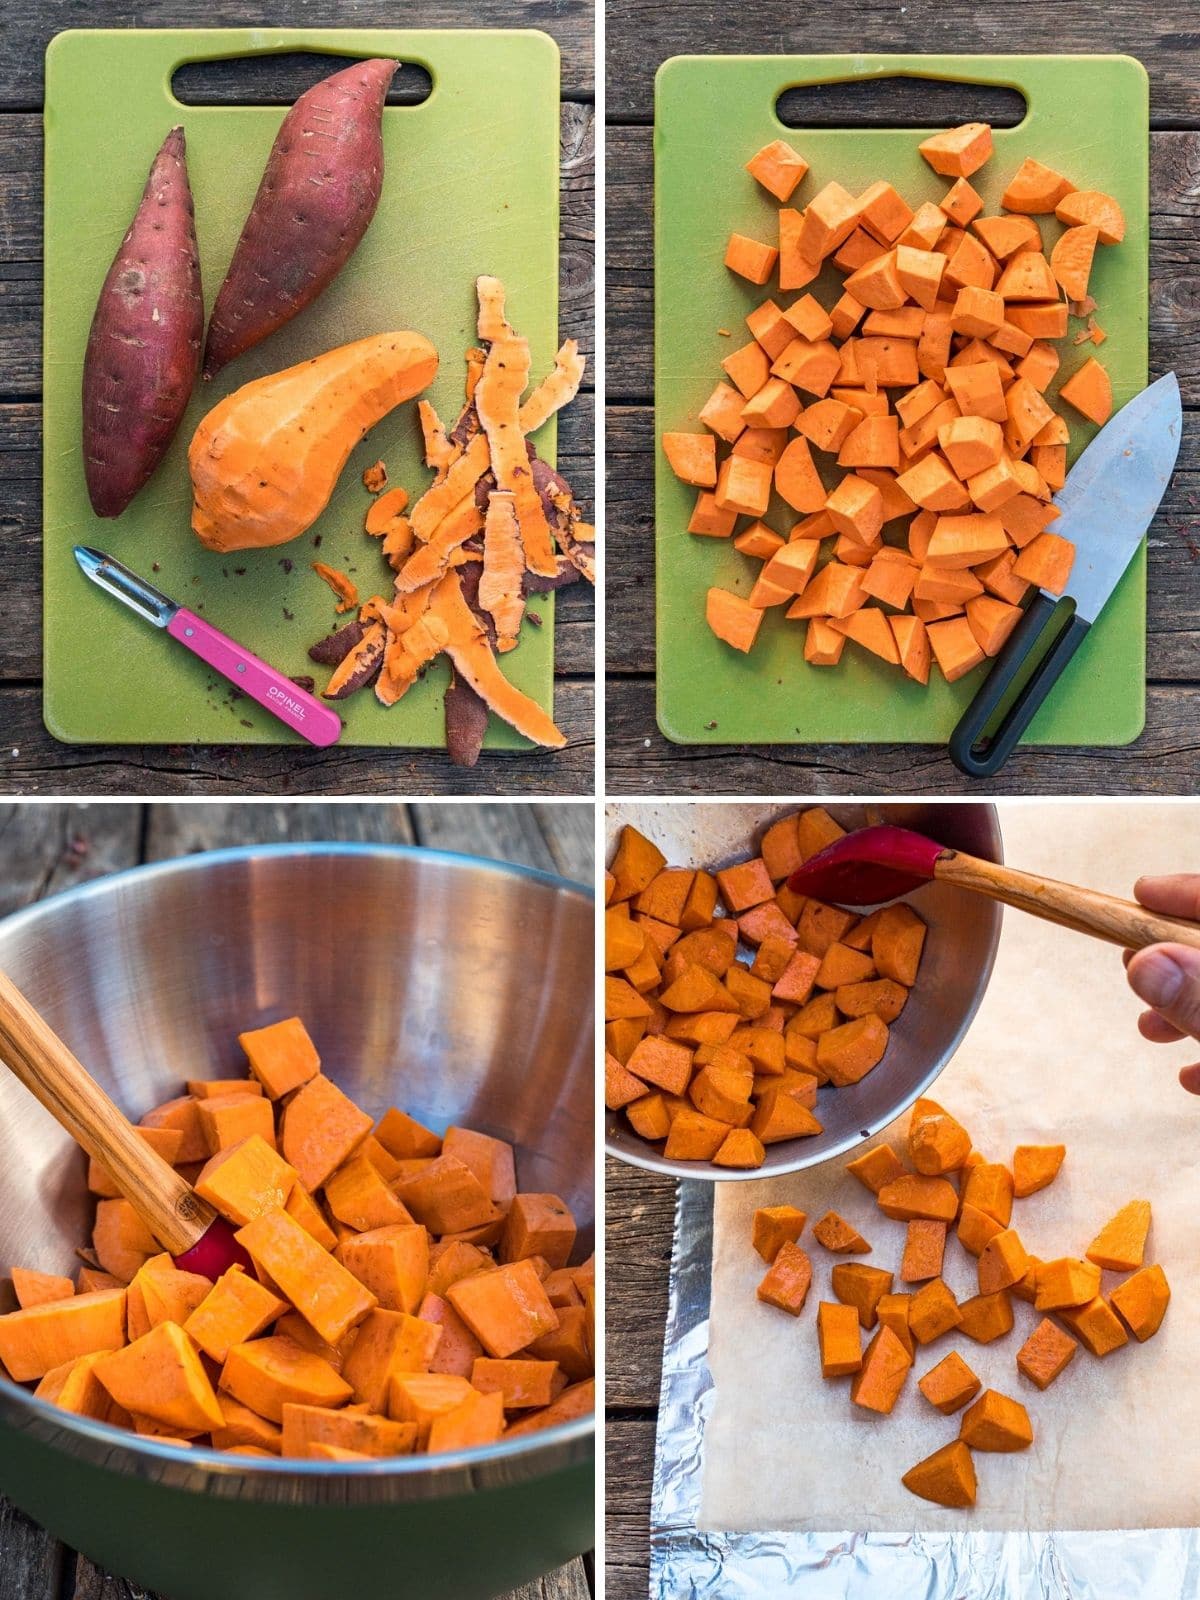 Foil packed mashed sweet potatoes steps 1-4